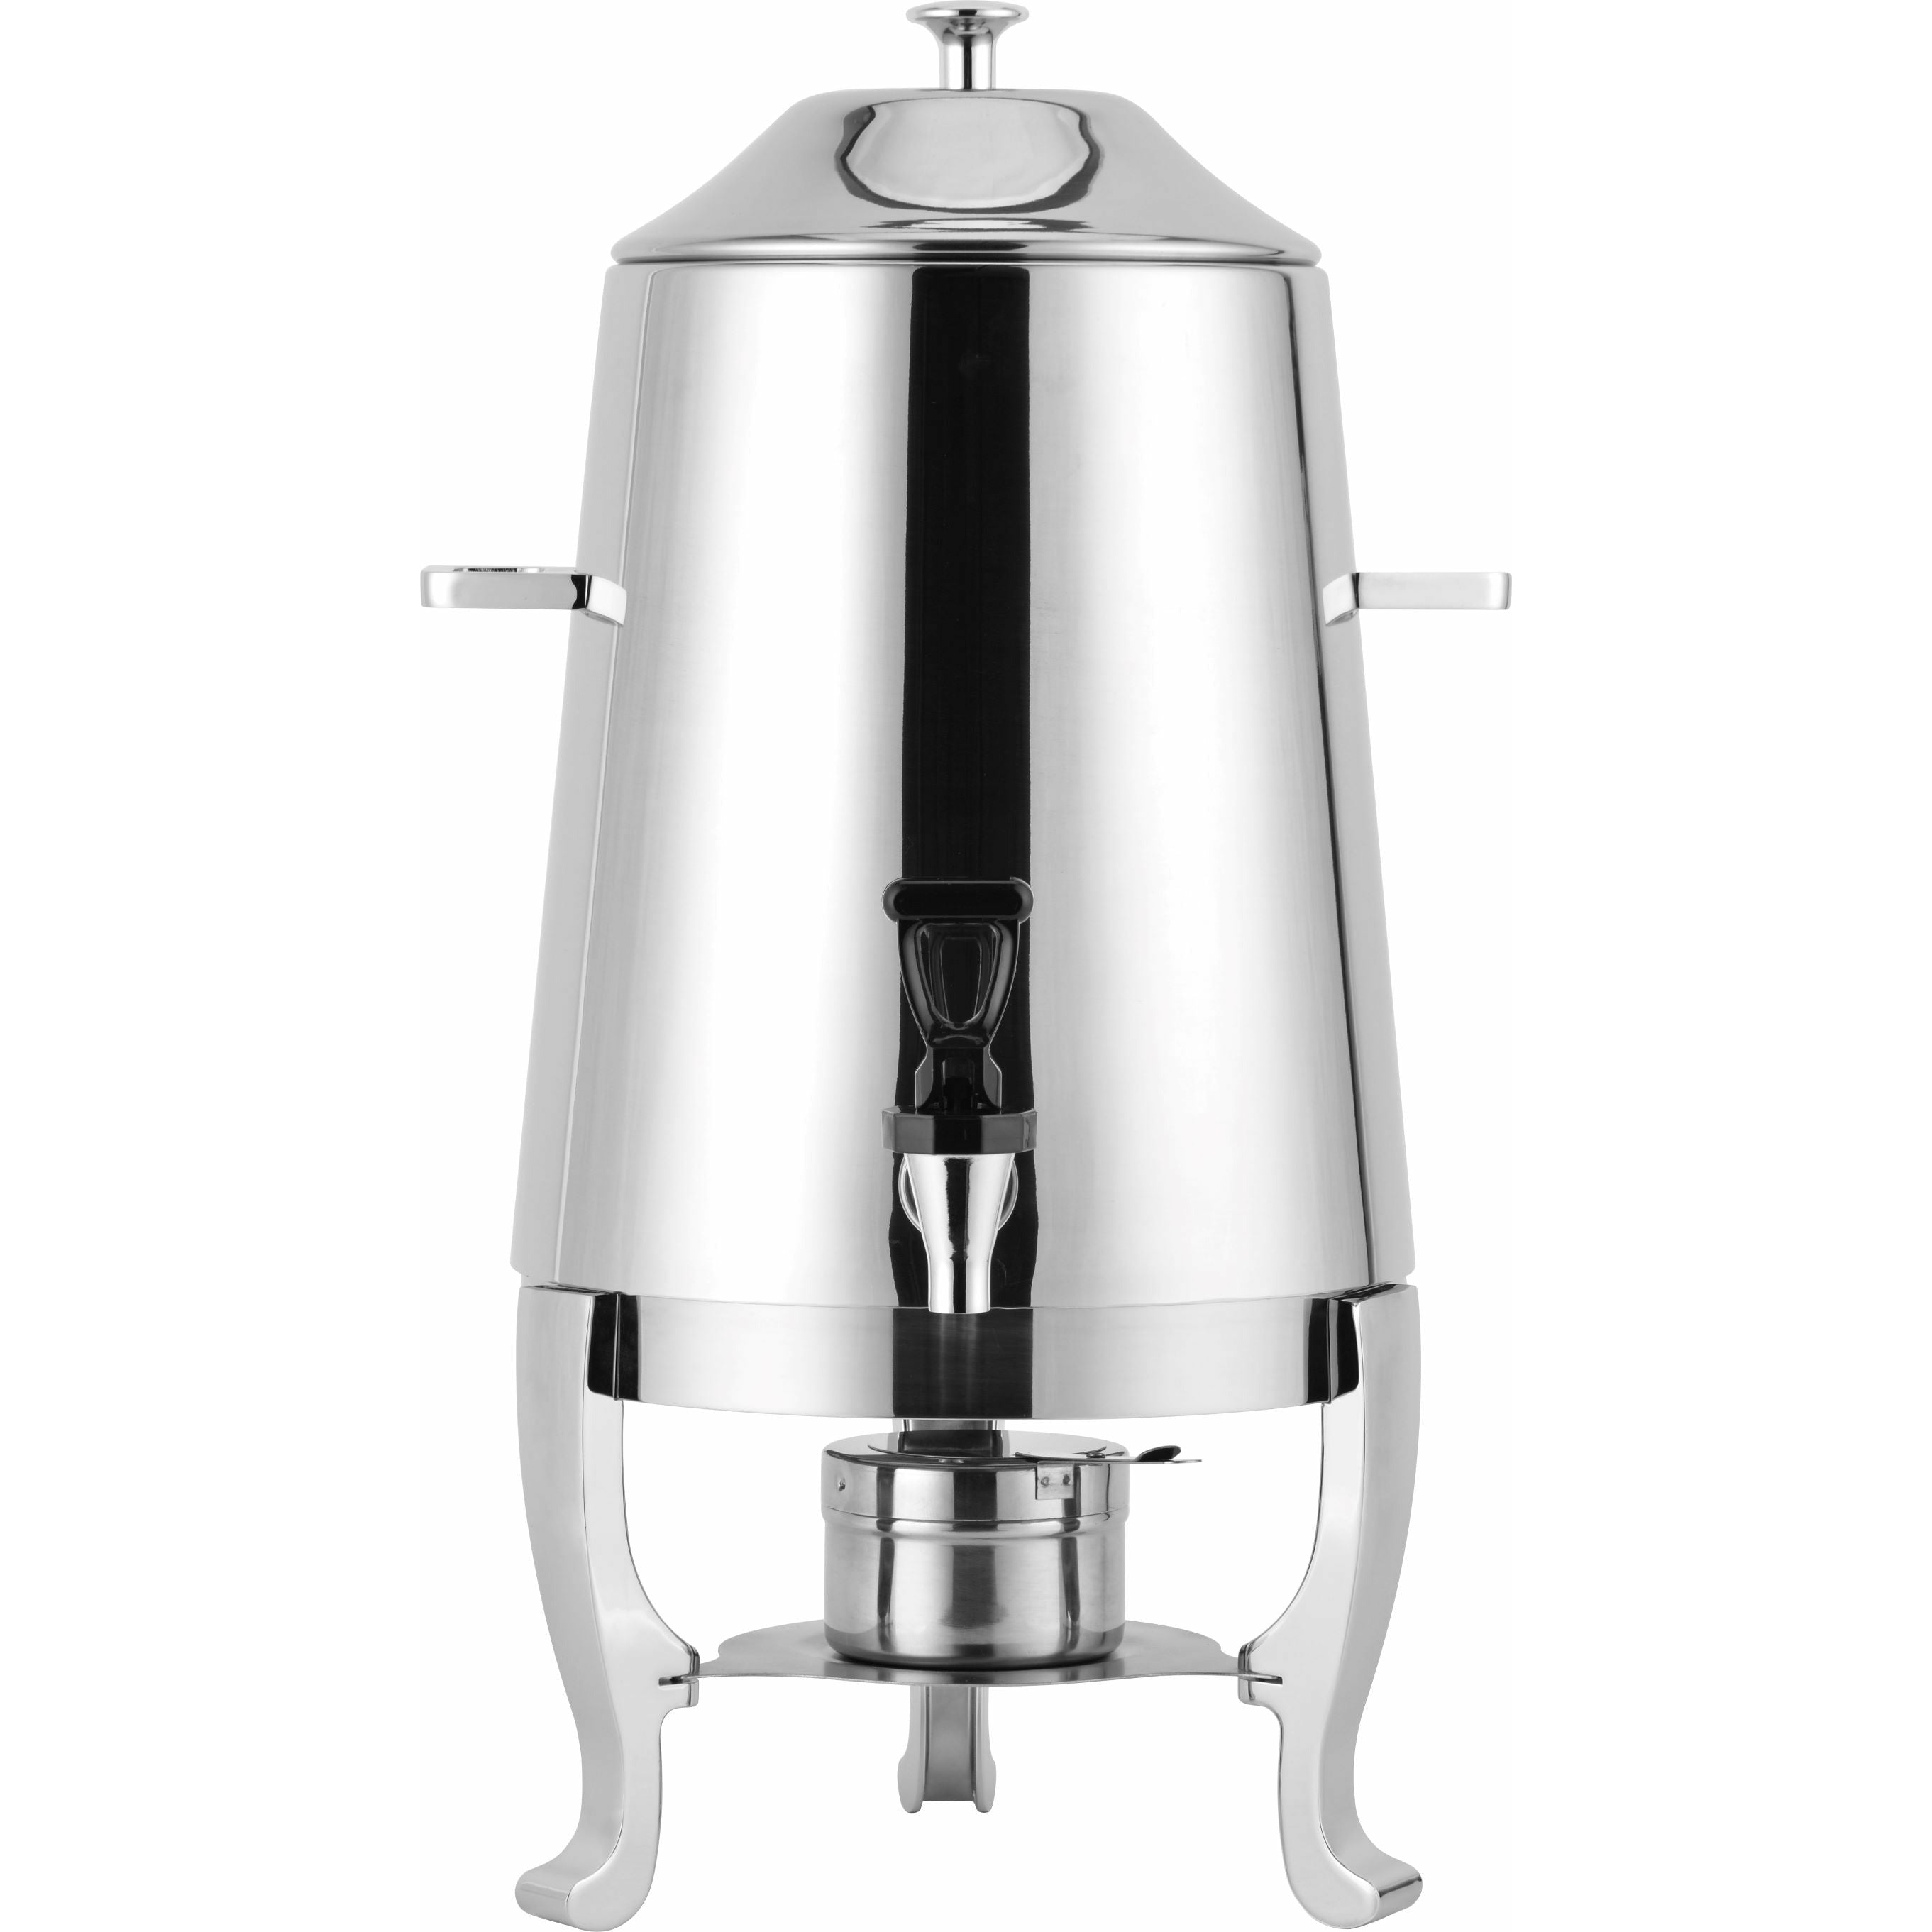 3 Gallons Stainless Steel Coffee Chafer Urn Beverage Dispenser for Juice Tea  Hot